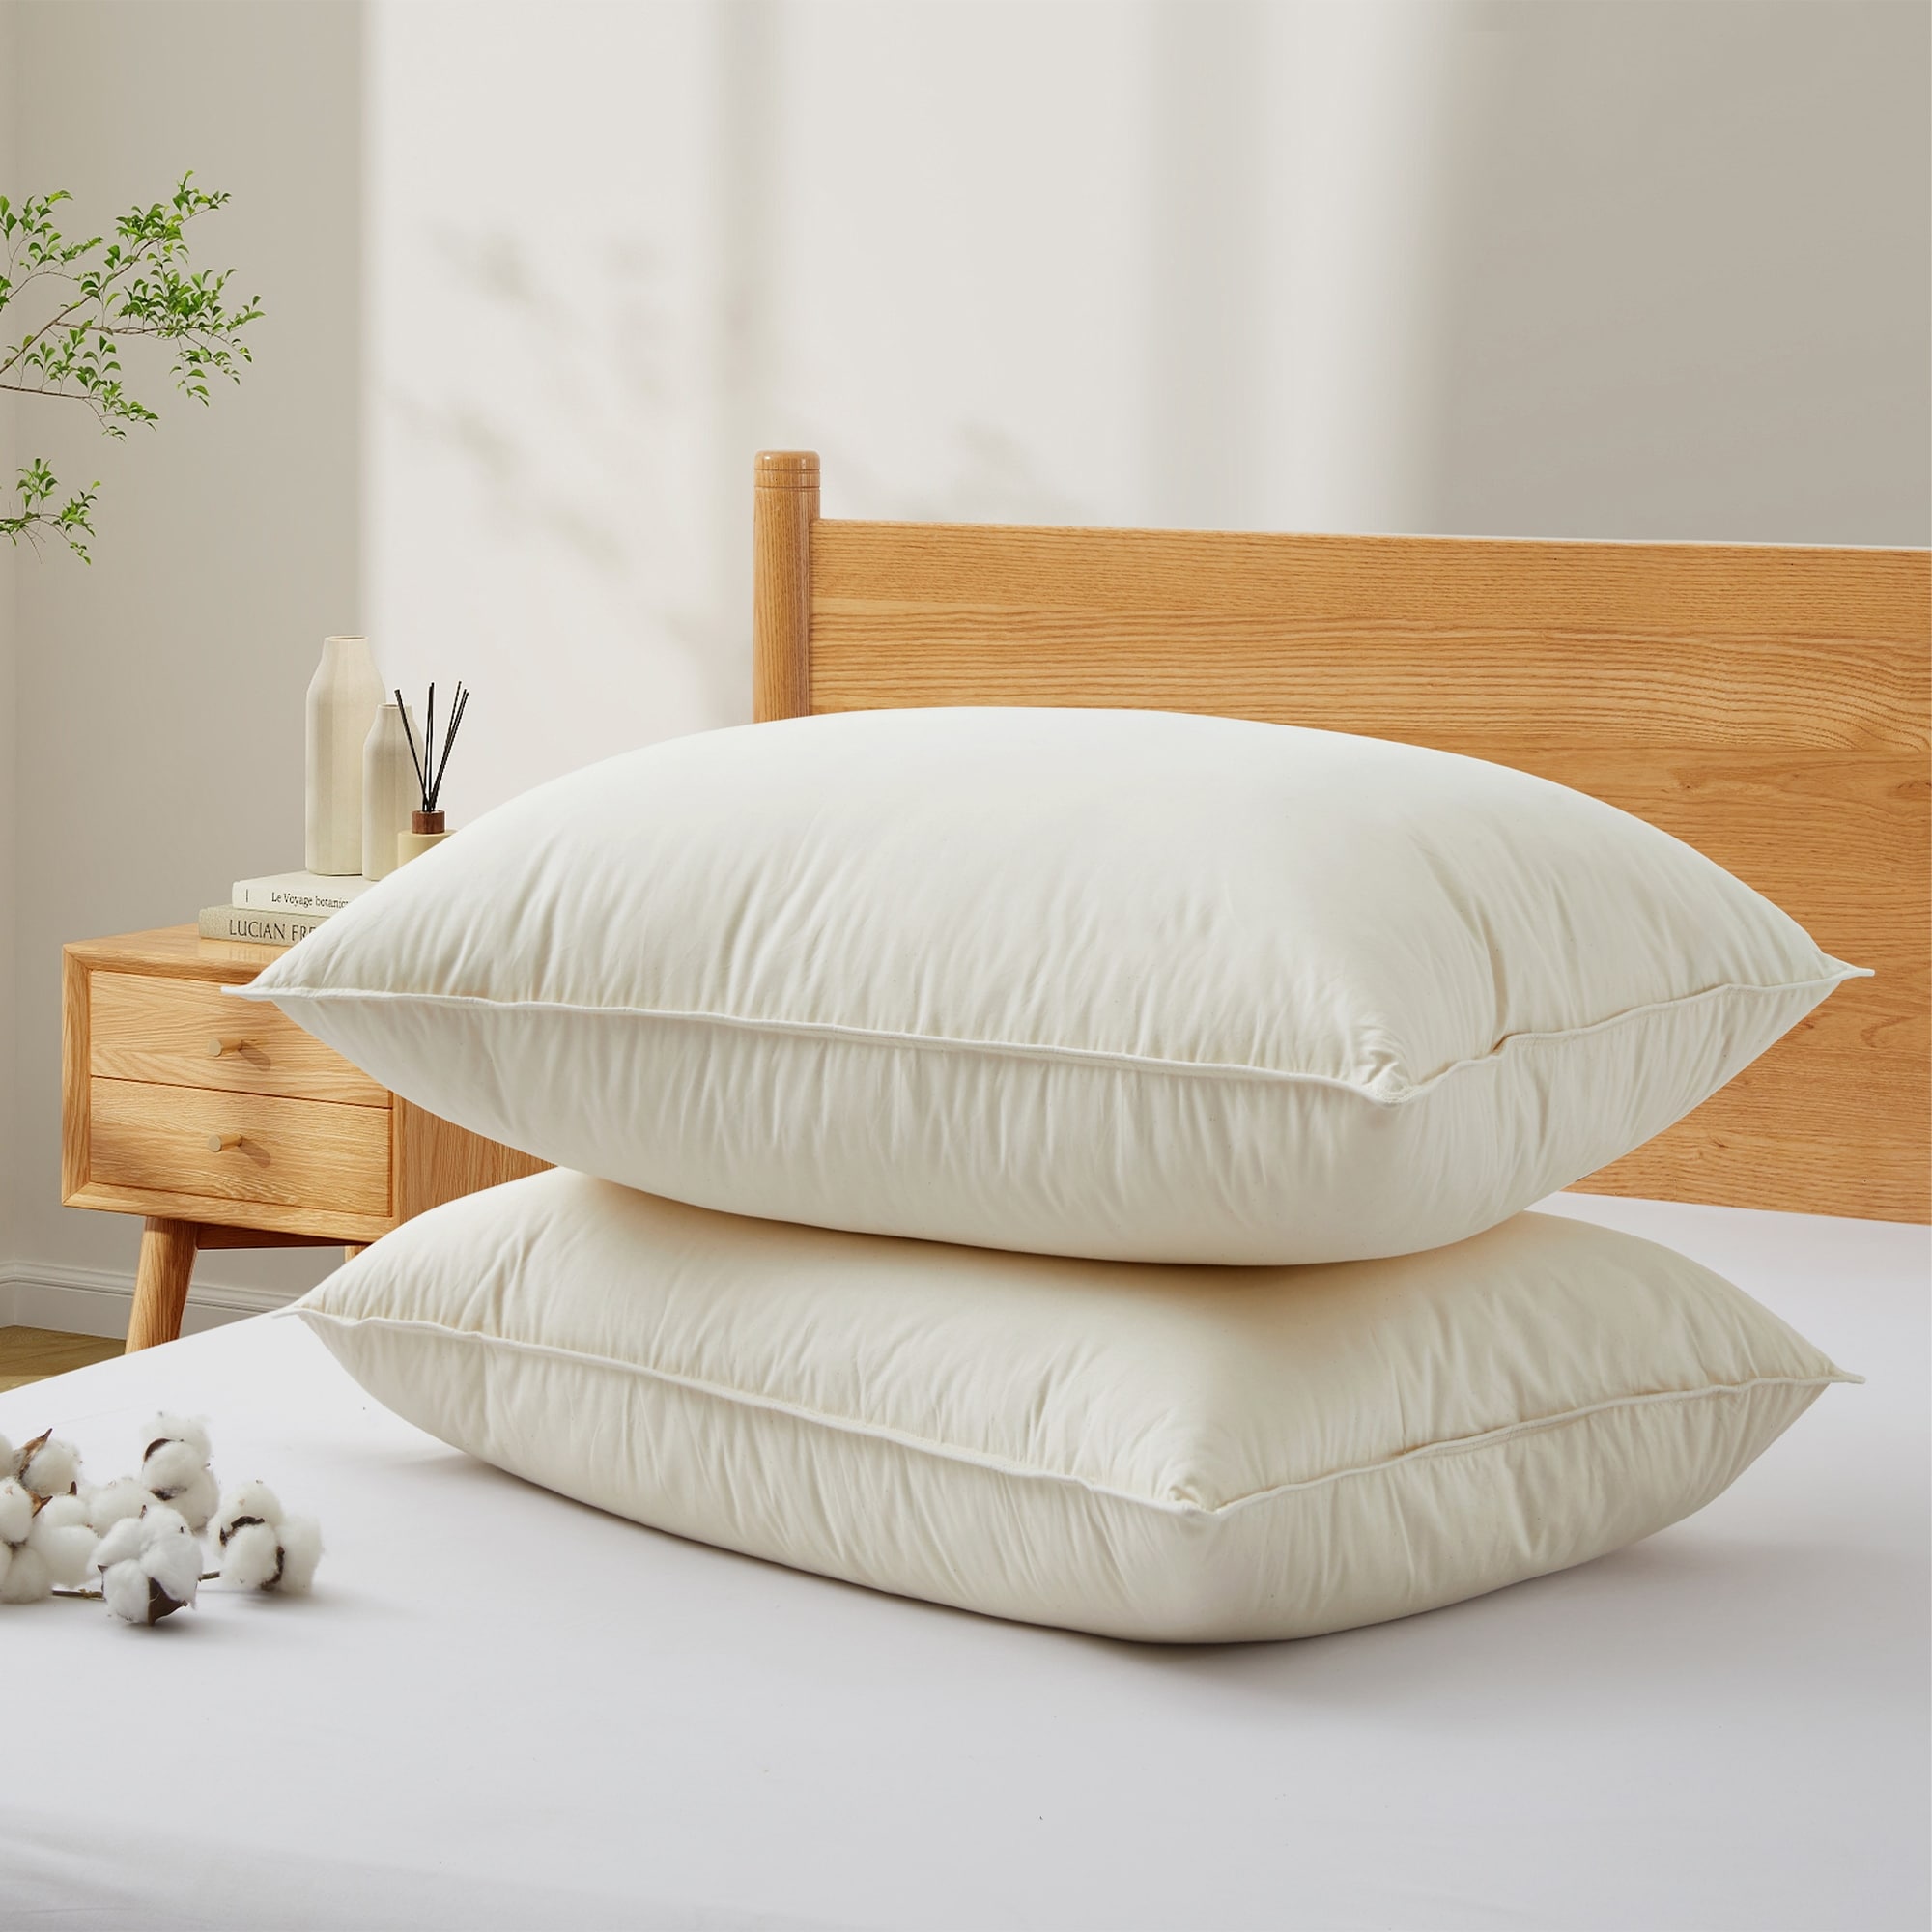 Set of 2 Organic Cotton Down Feather Bed Pillows for Sleeping, Pillow-in-a-pillow Design